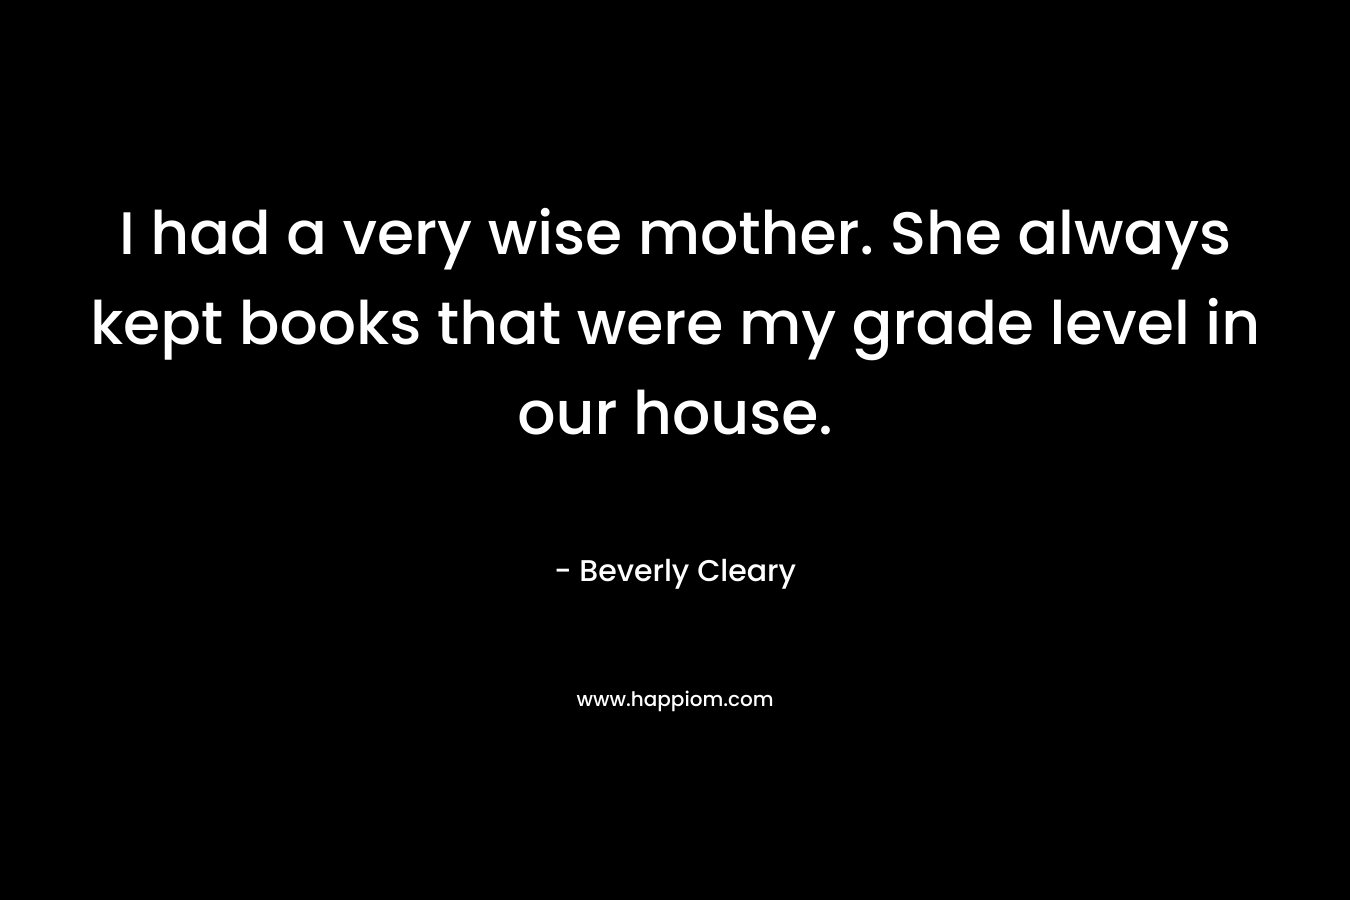 I had a very wise mother. She always kept books that were my grade level in our house. – Beverly Cleary